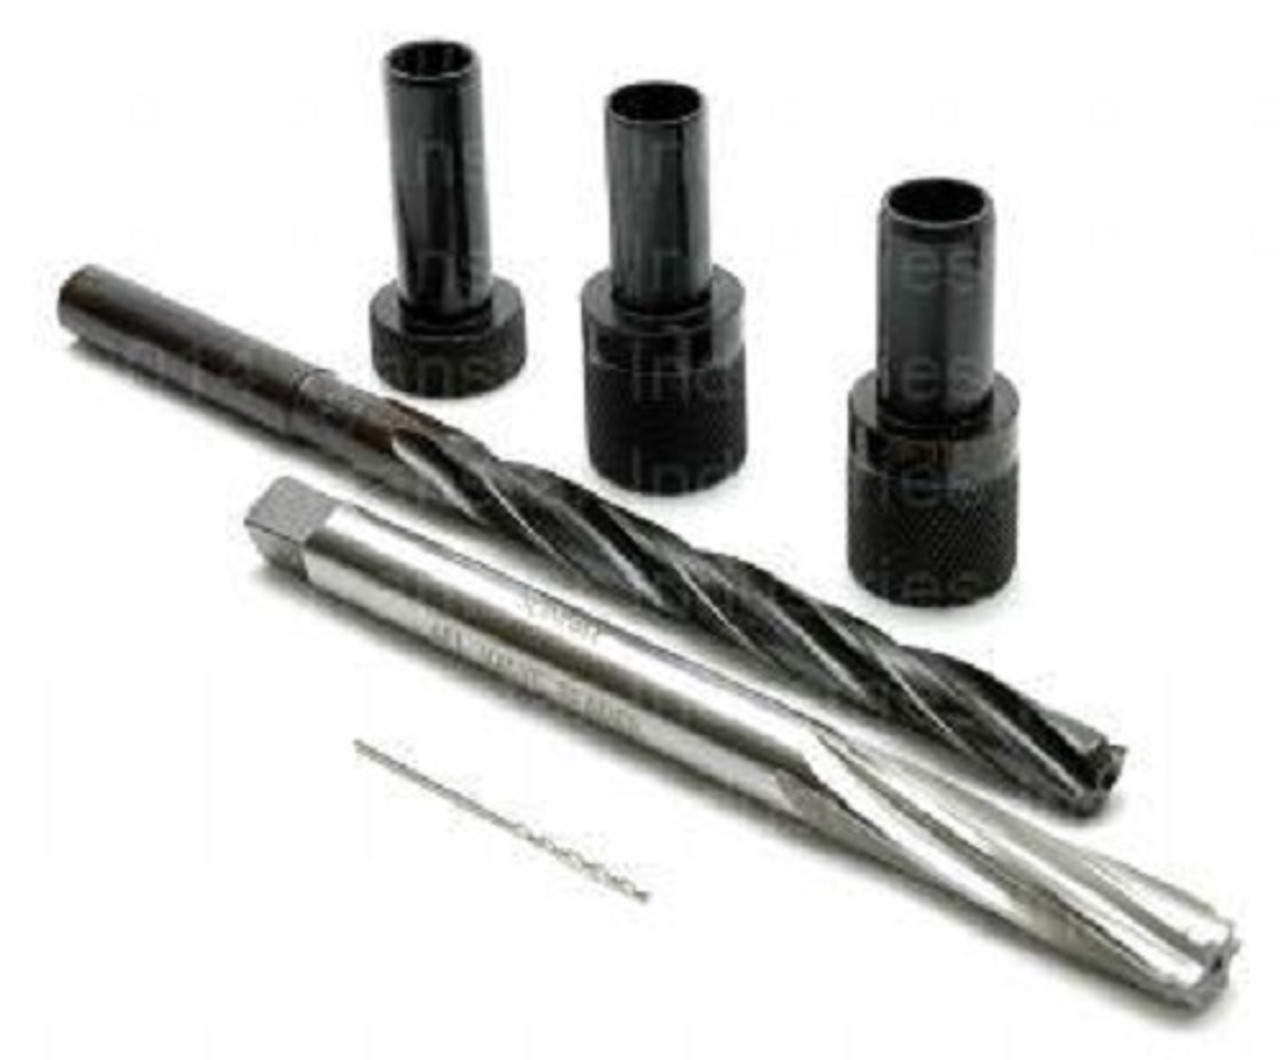 TOOL Sonnax 77754-TL AFL Valve Reamer  Jig Tool kit 4L60E 4L80E Actuator  Feed CT Powertrain Products